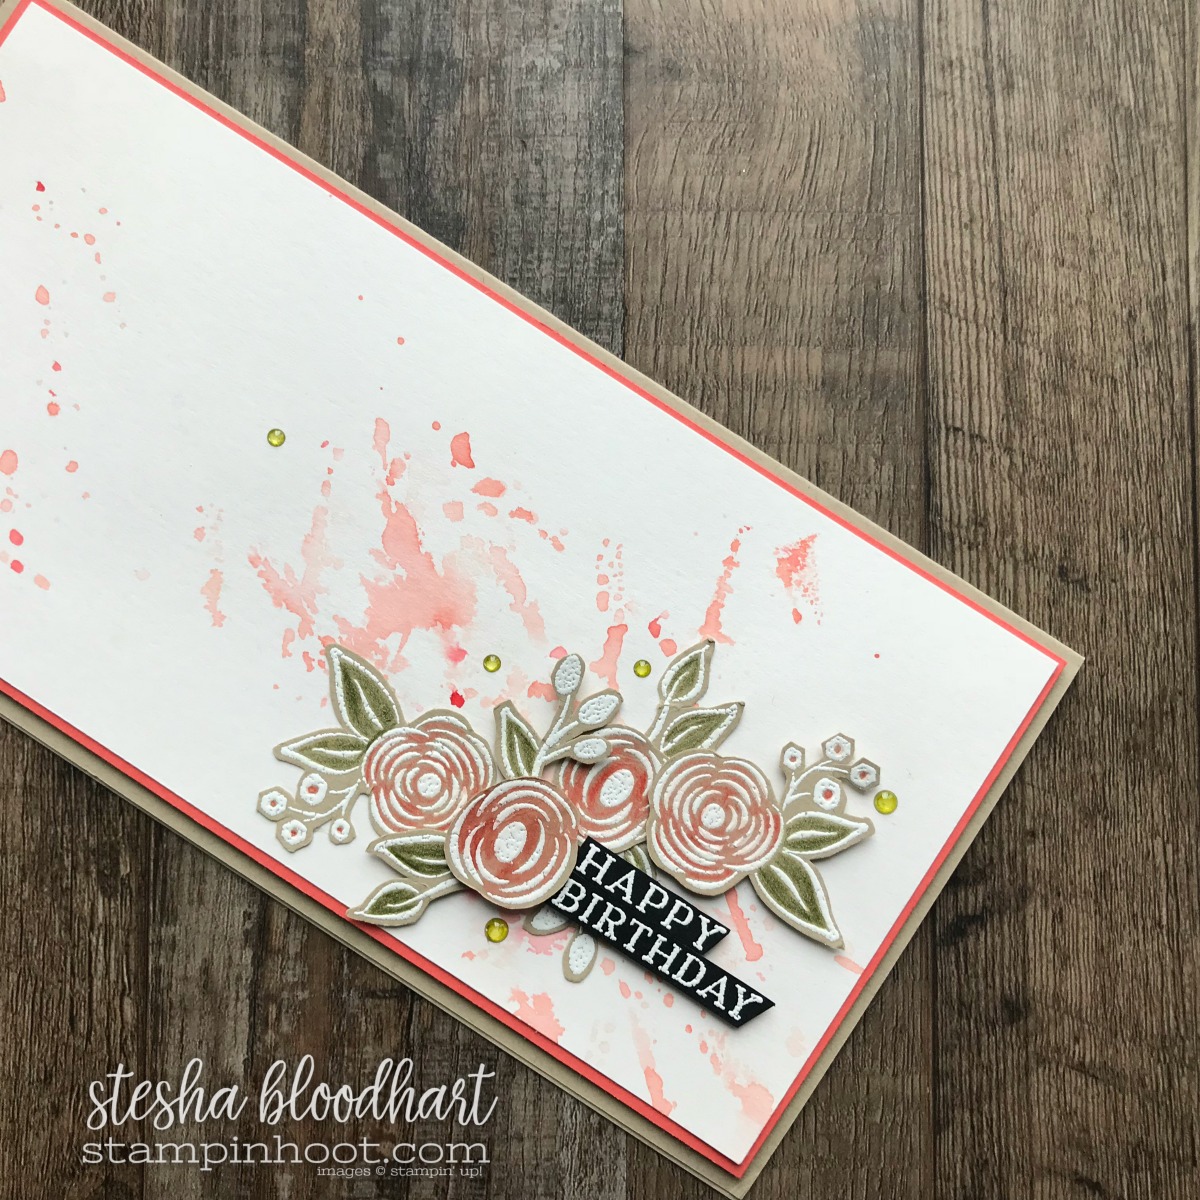 Perennial Birthday Stamp Set from the Stampin' Up! 2018 Occasions Catalog for GDP128 Case the Designer Challenge Card Created by Stesha Bloodhart, Stampin' Hoot! #steshabloodhart #stampinhoot #gdp128